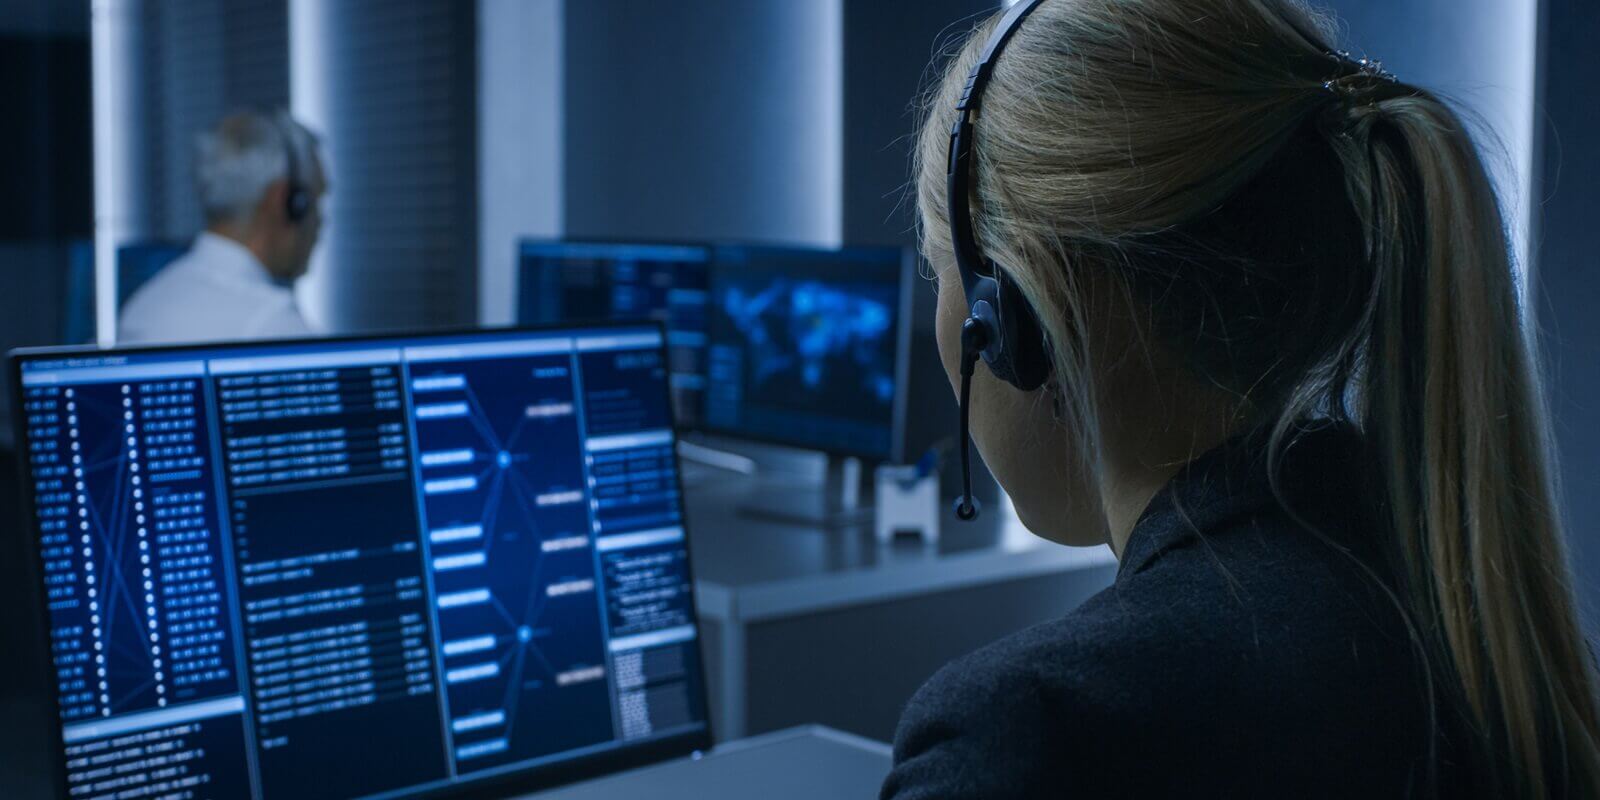 female controller wearing headset working on personal computer and monitoring siecial Intelligence systems